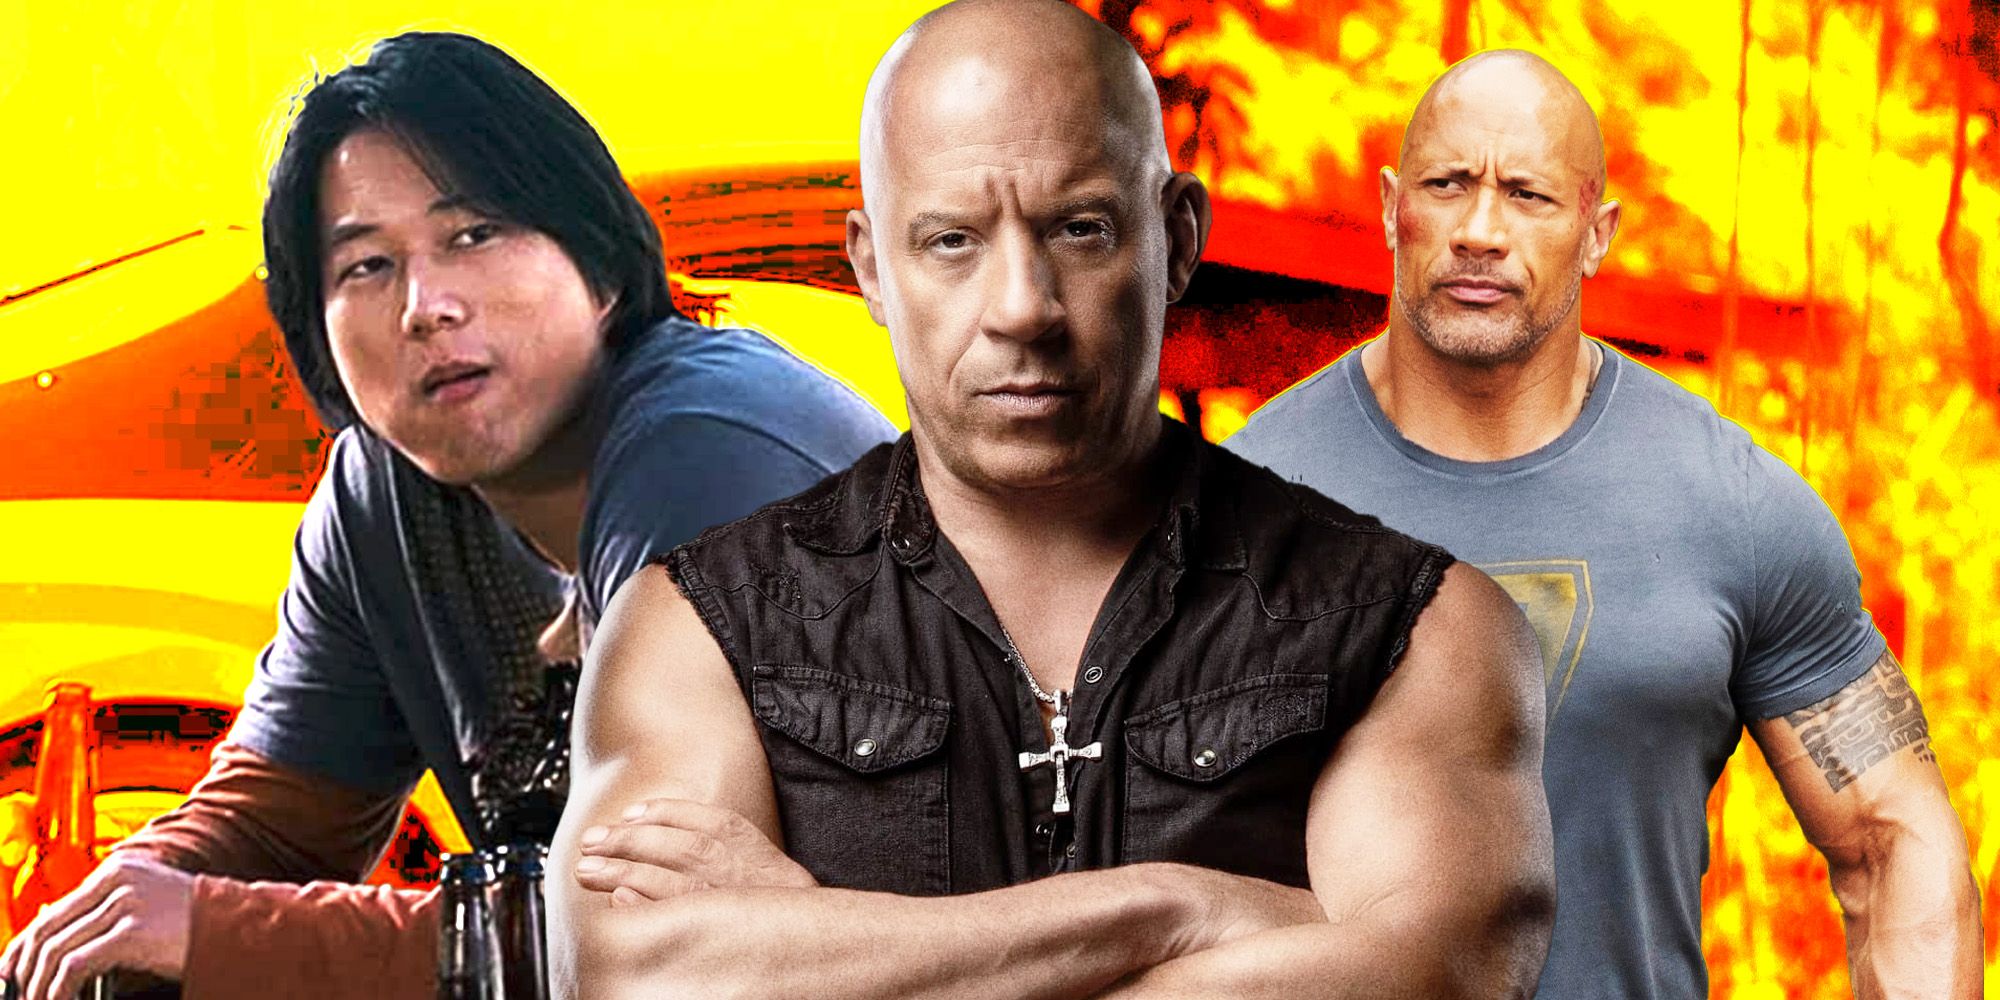 A custom image featuring Han in Tokyo Drift, Dominic Toretto in Fast X, and Hobbs in Hobbs & Shaw 